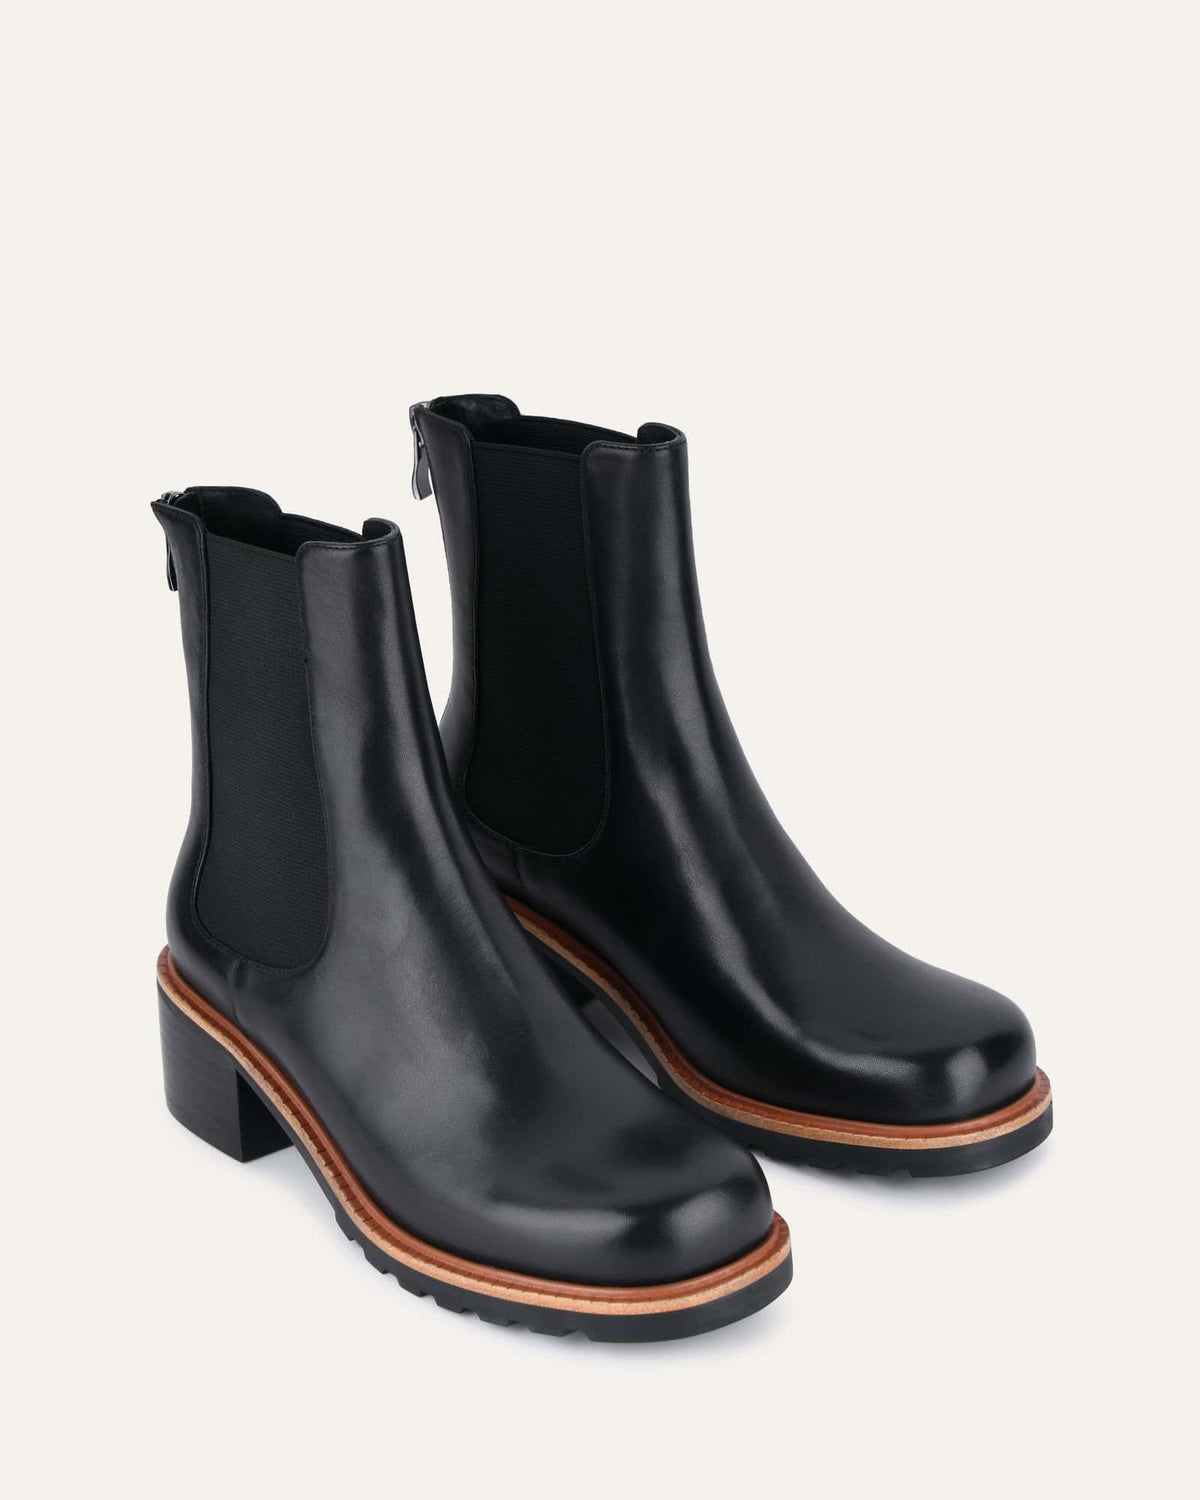 BEVERLEY MID ANKLE BOOTS BLACK LEATHER